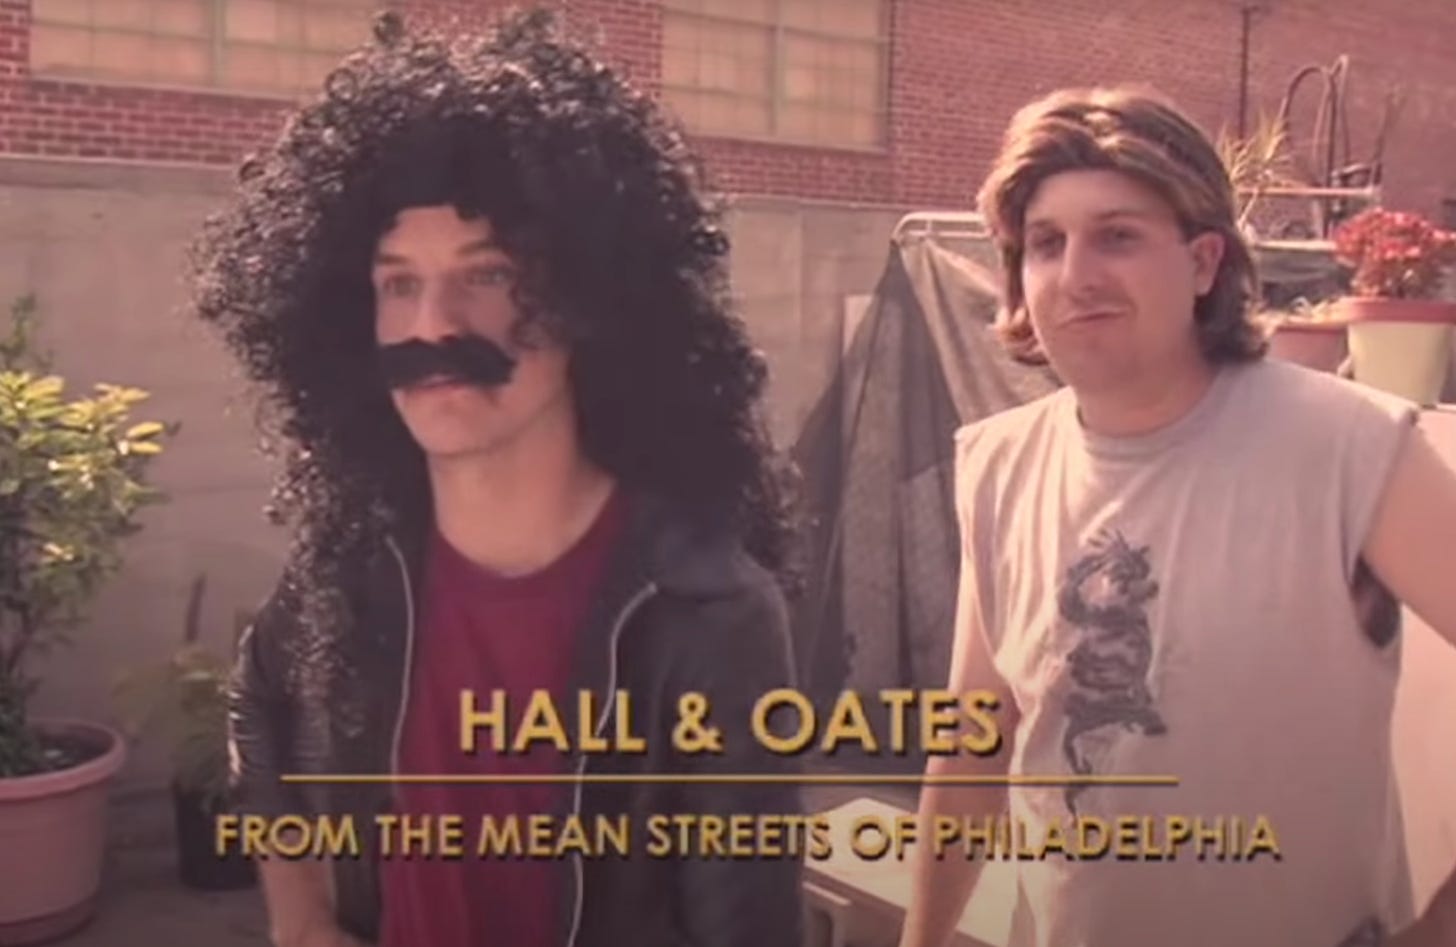 man in a long black curly wig with a fake moustace. Behind him is a man with a blonde wig. The caption reads "Hall and Oates - from the mean streets of Philadelphia"